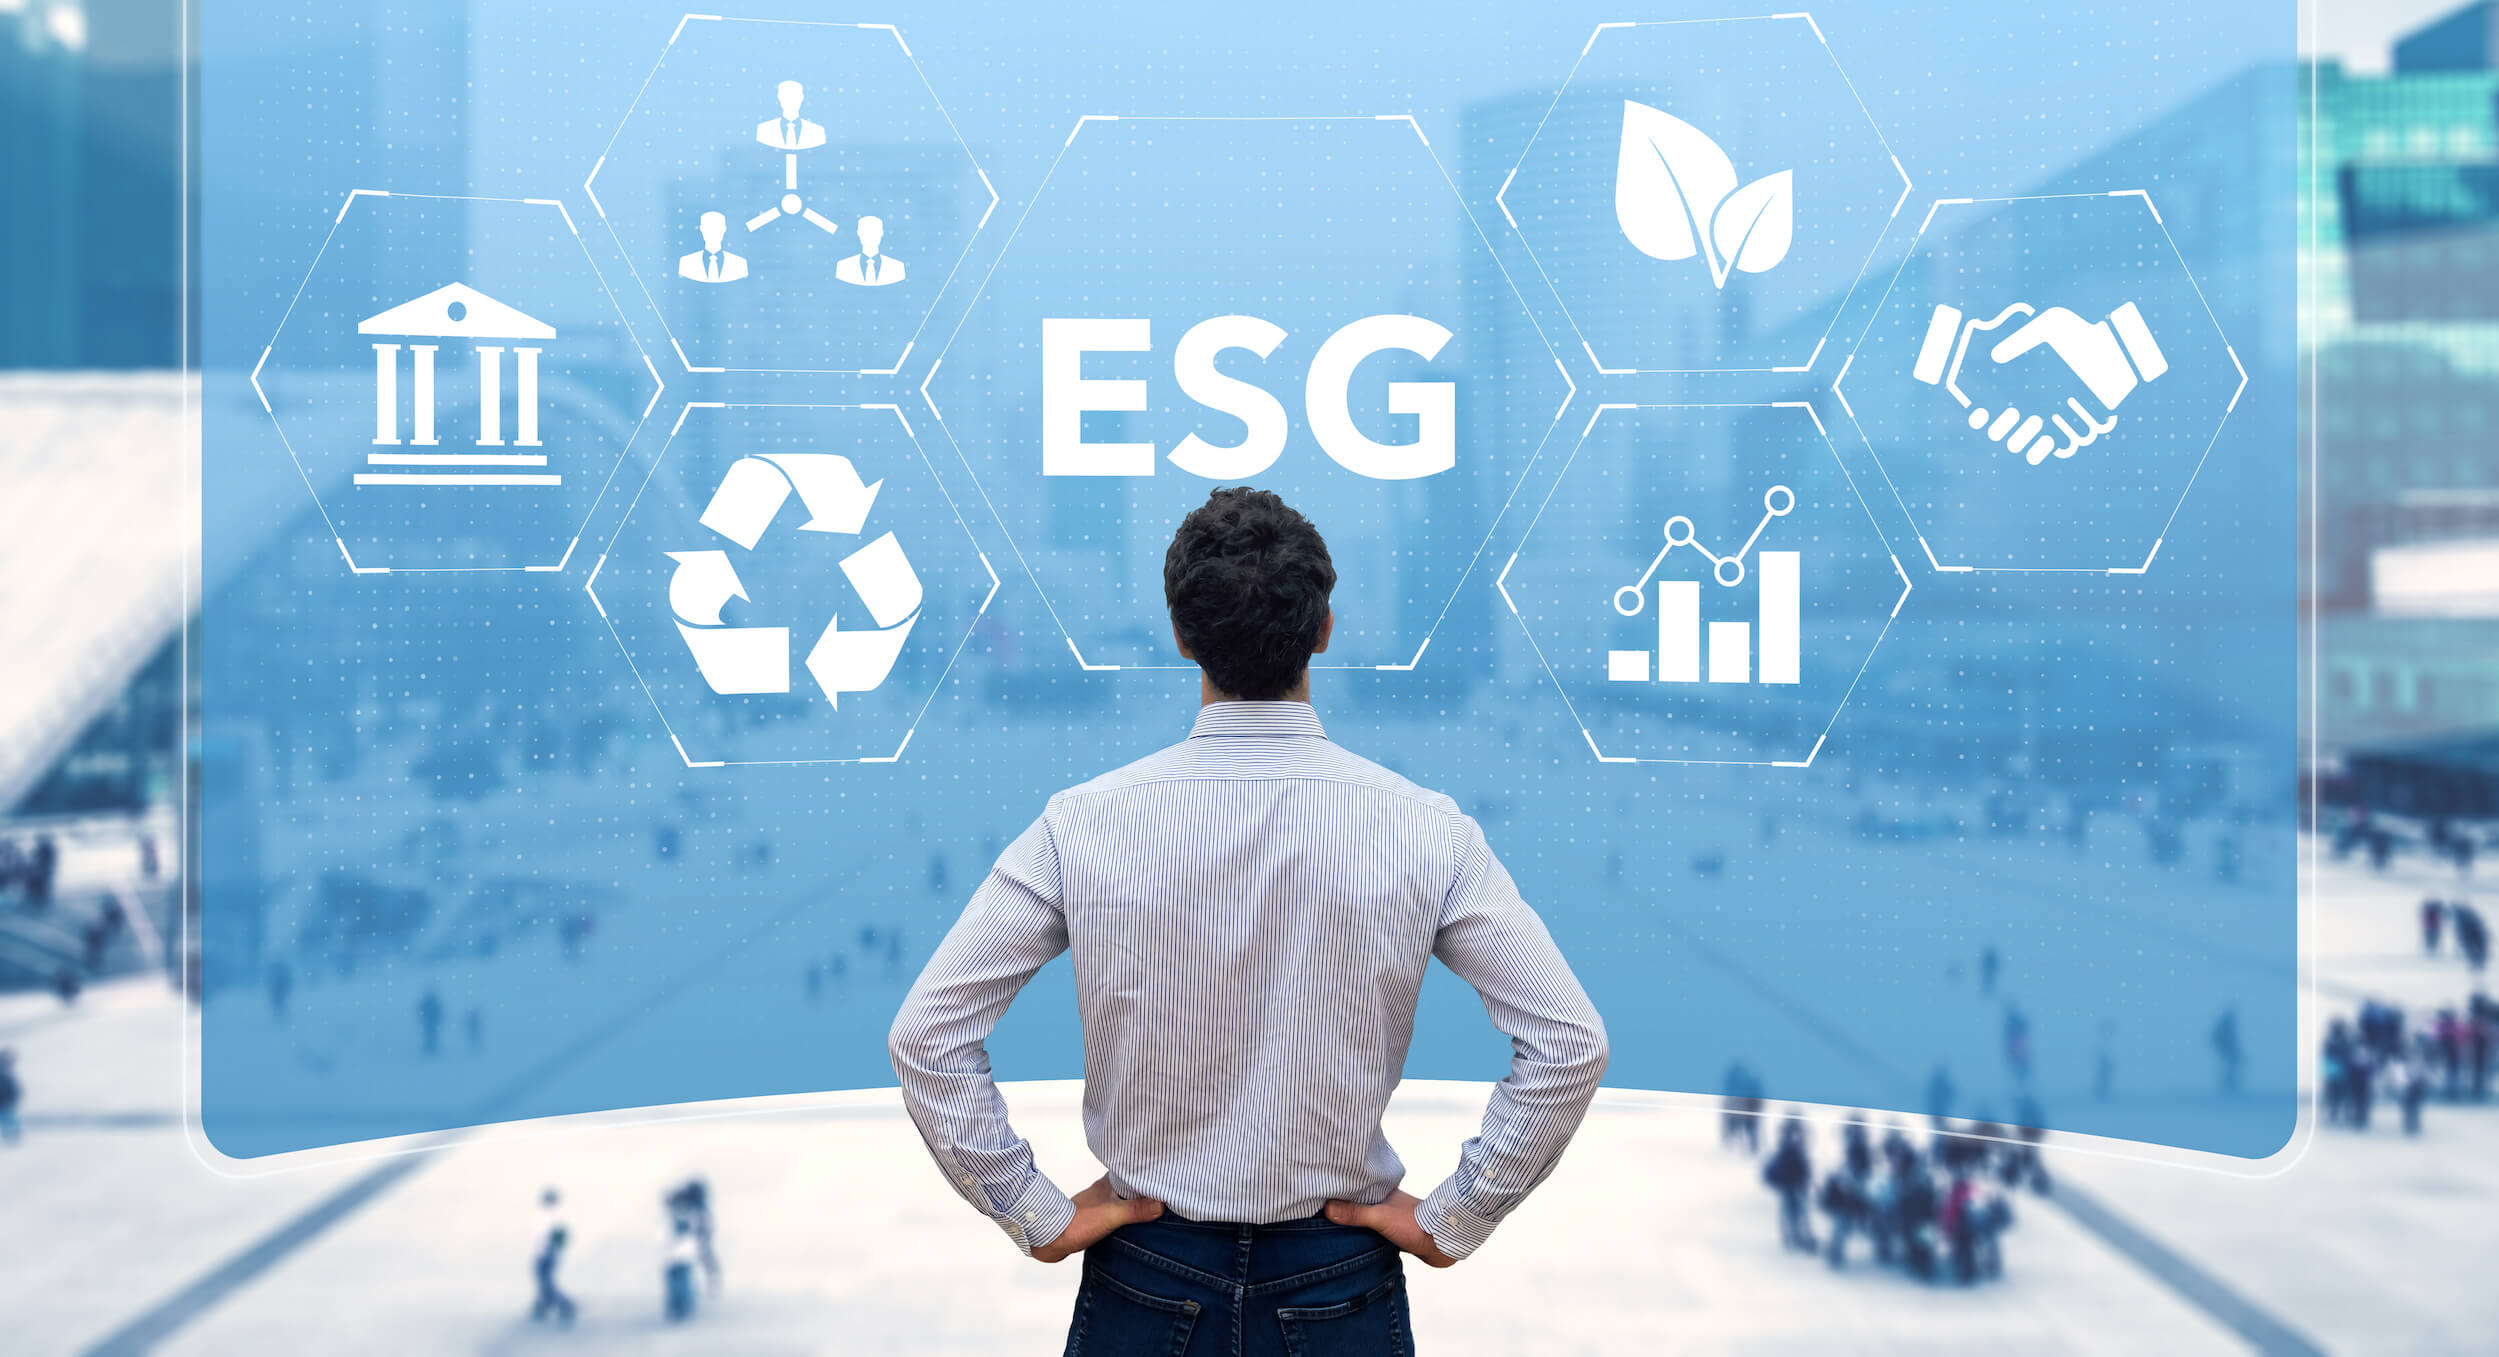 Concerns Raised over Costs of Anti-ESG Bills › American Greatness